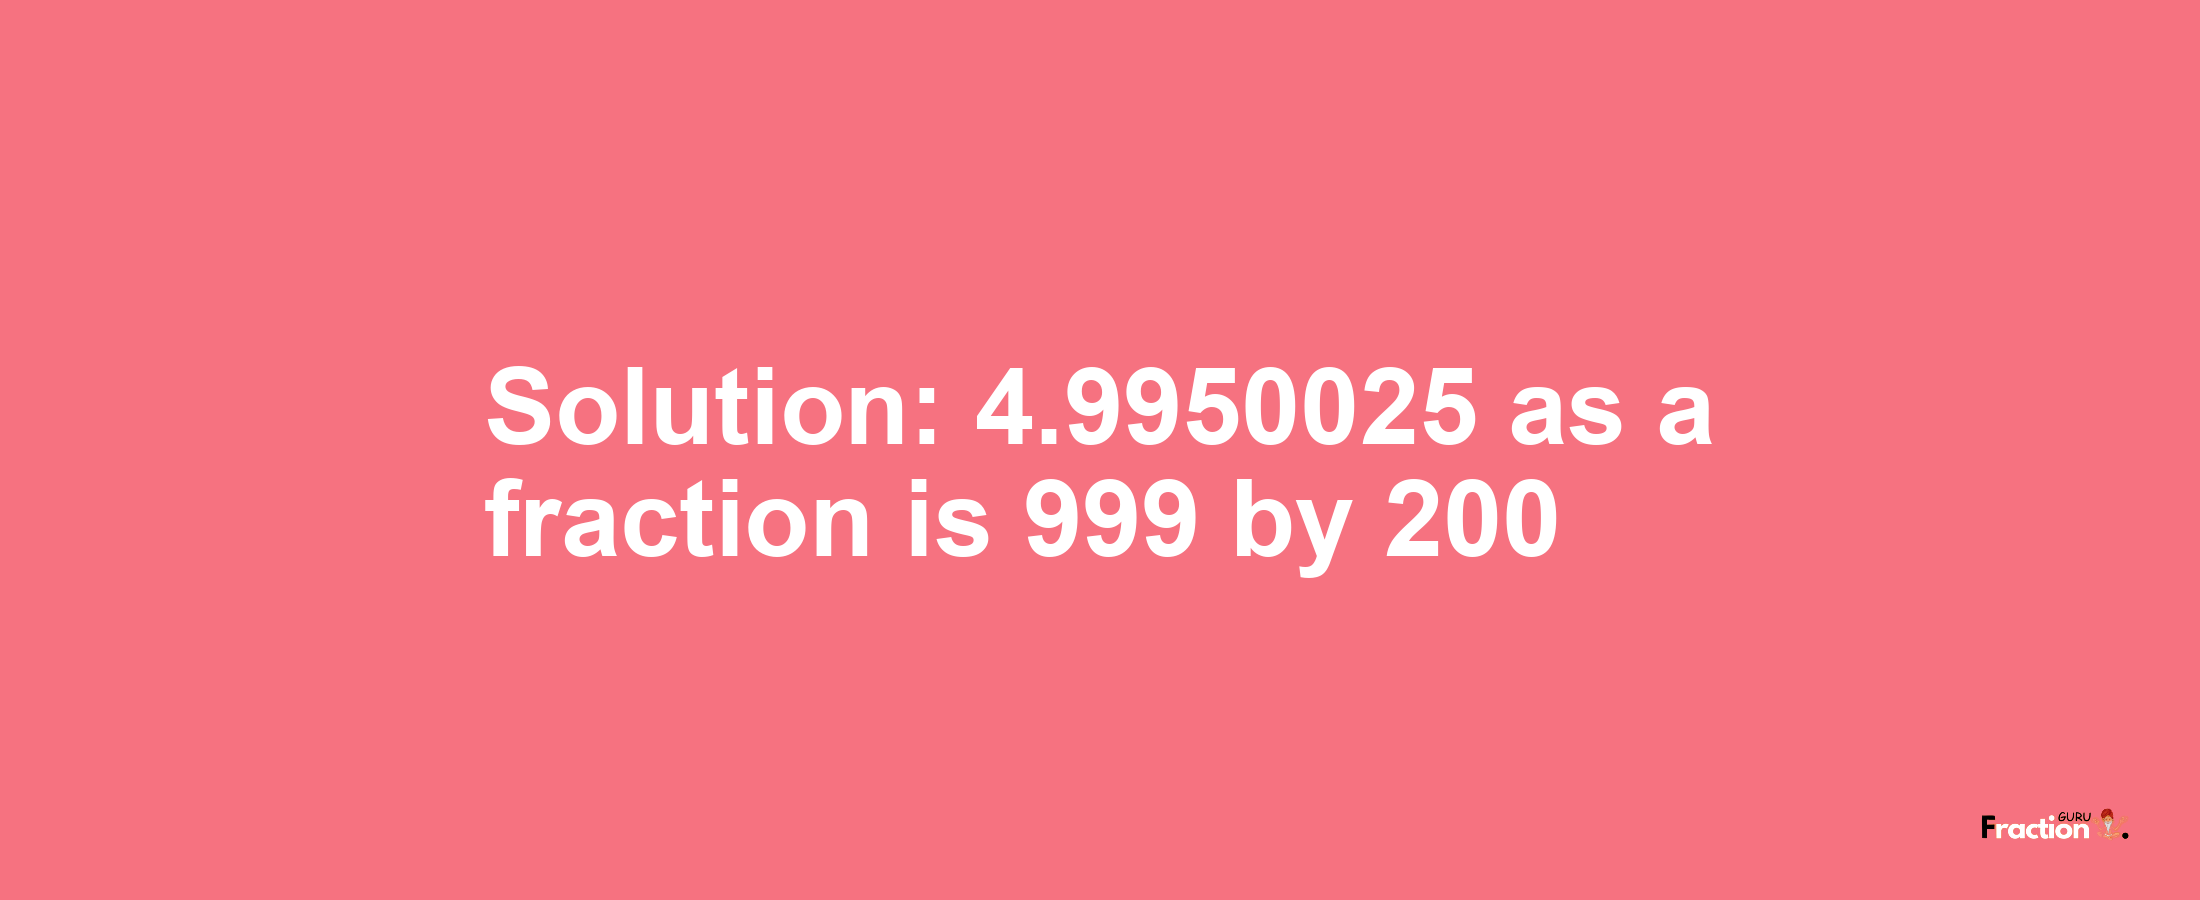 Solution:4.9950025 as a fraction is 999/200